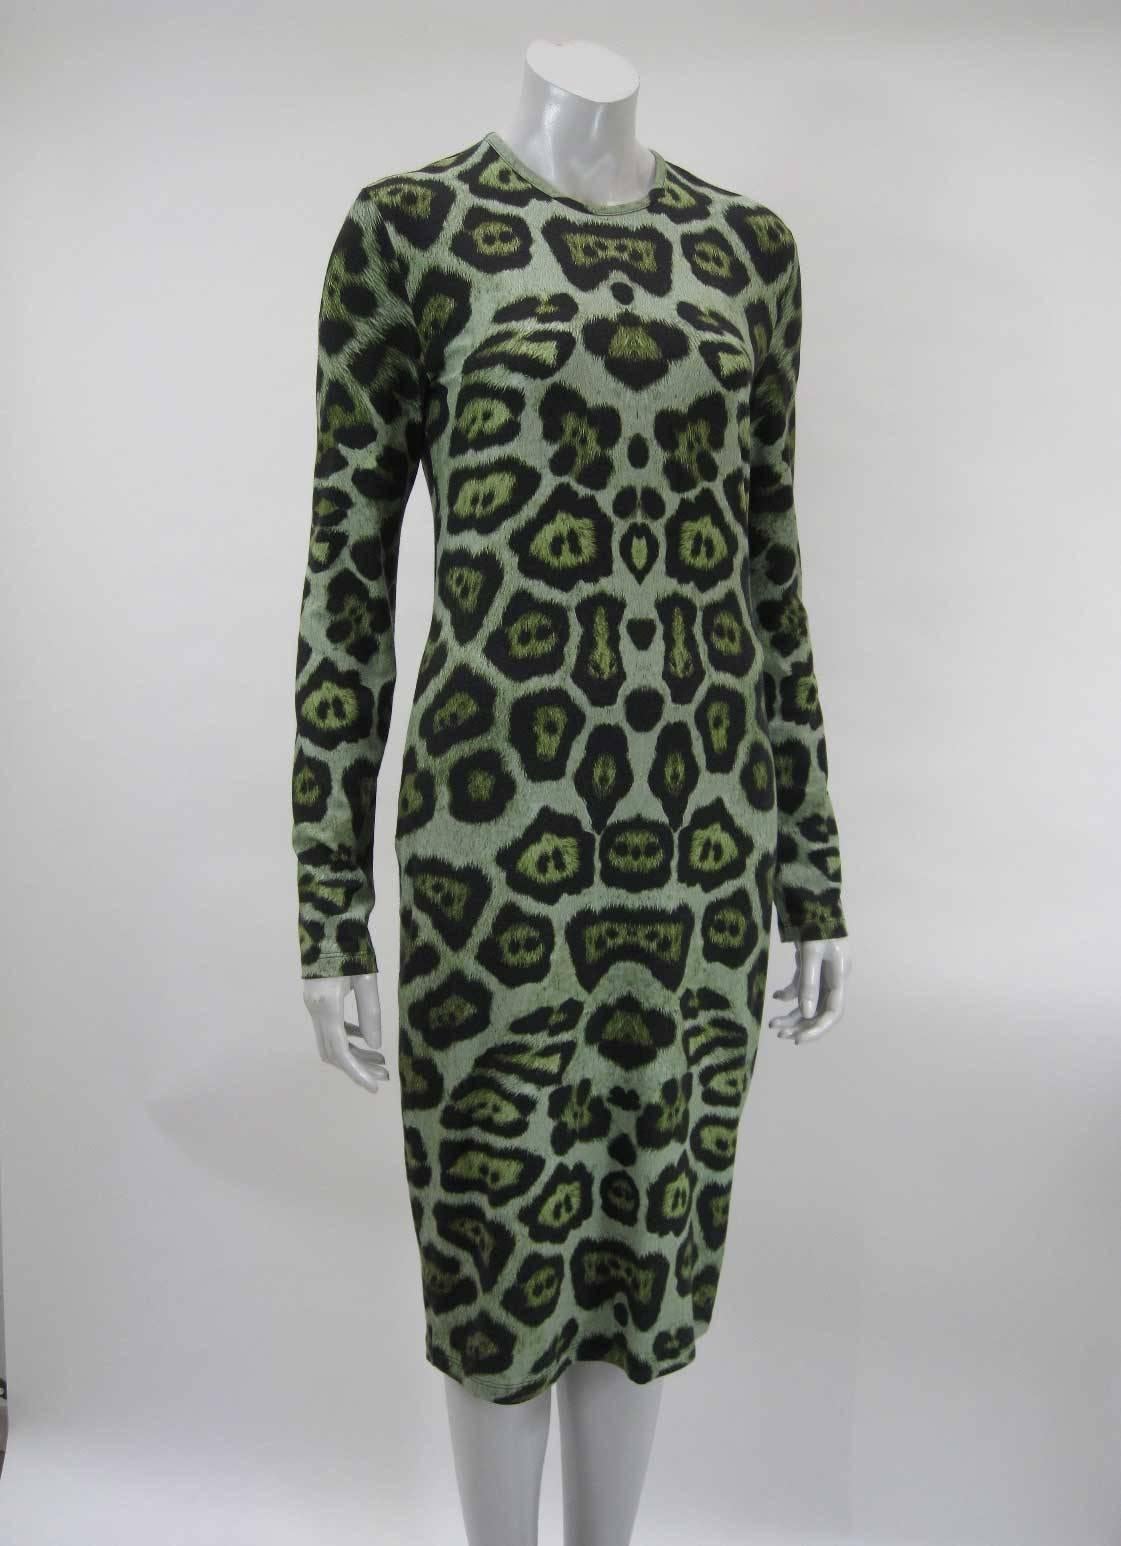 Stunning Givenchy jersey leopard print dress.

Vibrant hues and green and blue-green and black.

Sheath shape.

Body hugging with ample stretch.

Back zipper.

Long sleeves.

Tagged size 44.

Fabric is viscose, elastane. Lining/finishing fabric is